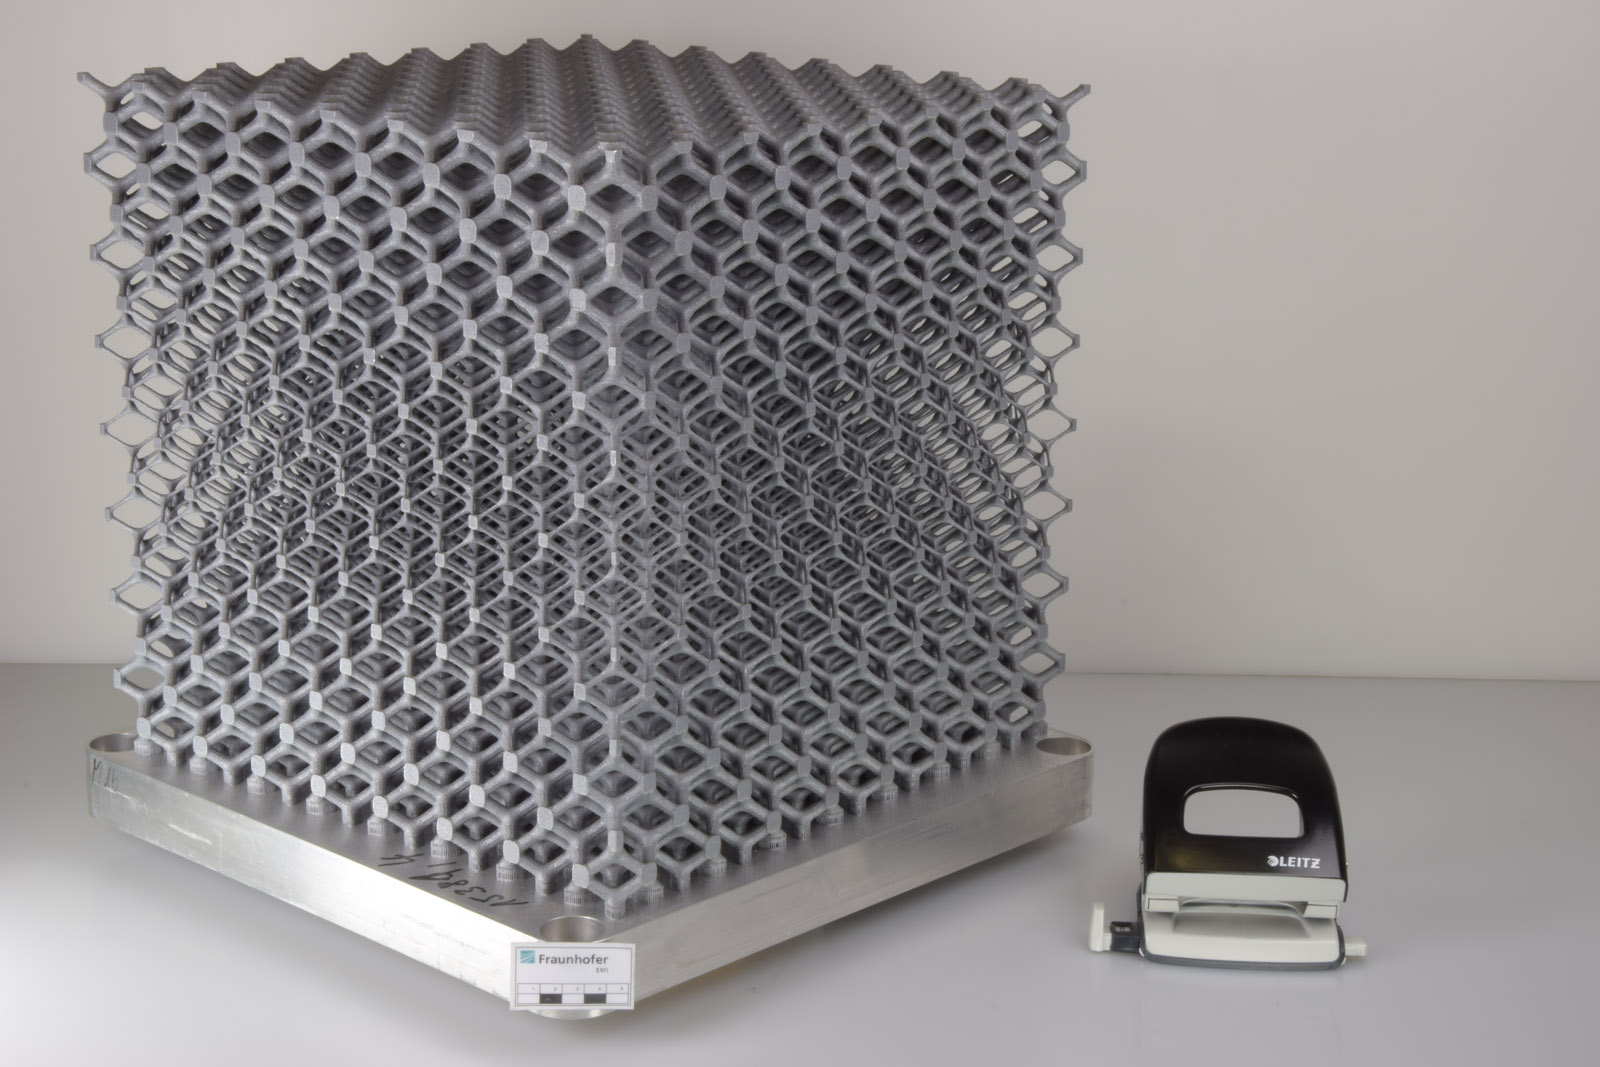 Lattice cube with edge lengthof 40 centimeters, one of thelargest metal structures manufacturedusing selective lasermelting (SLM).